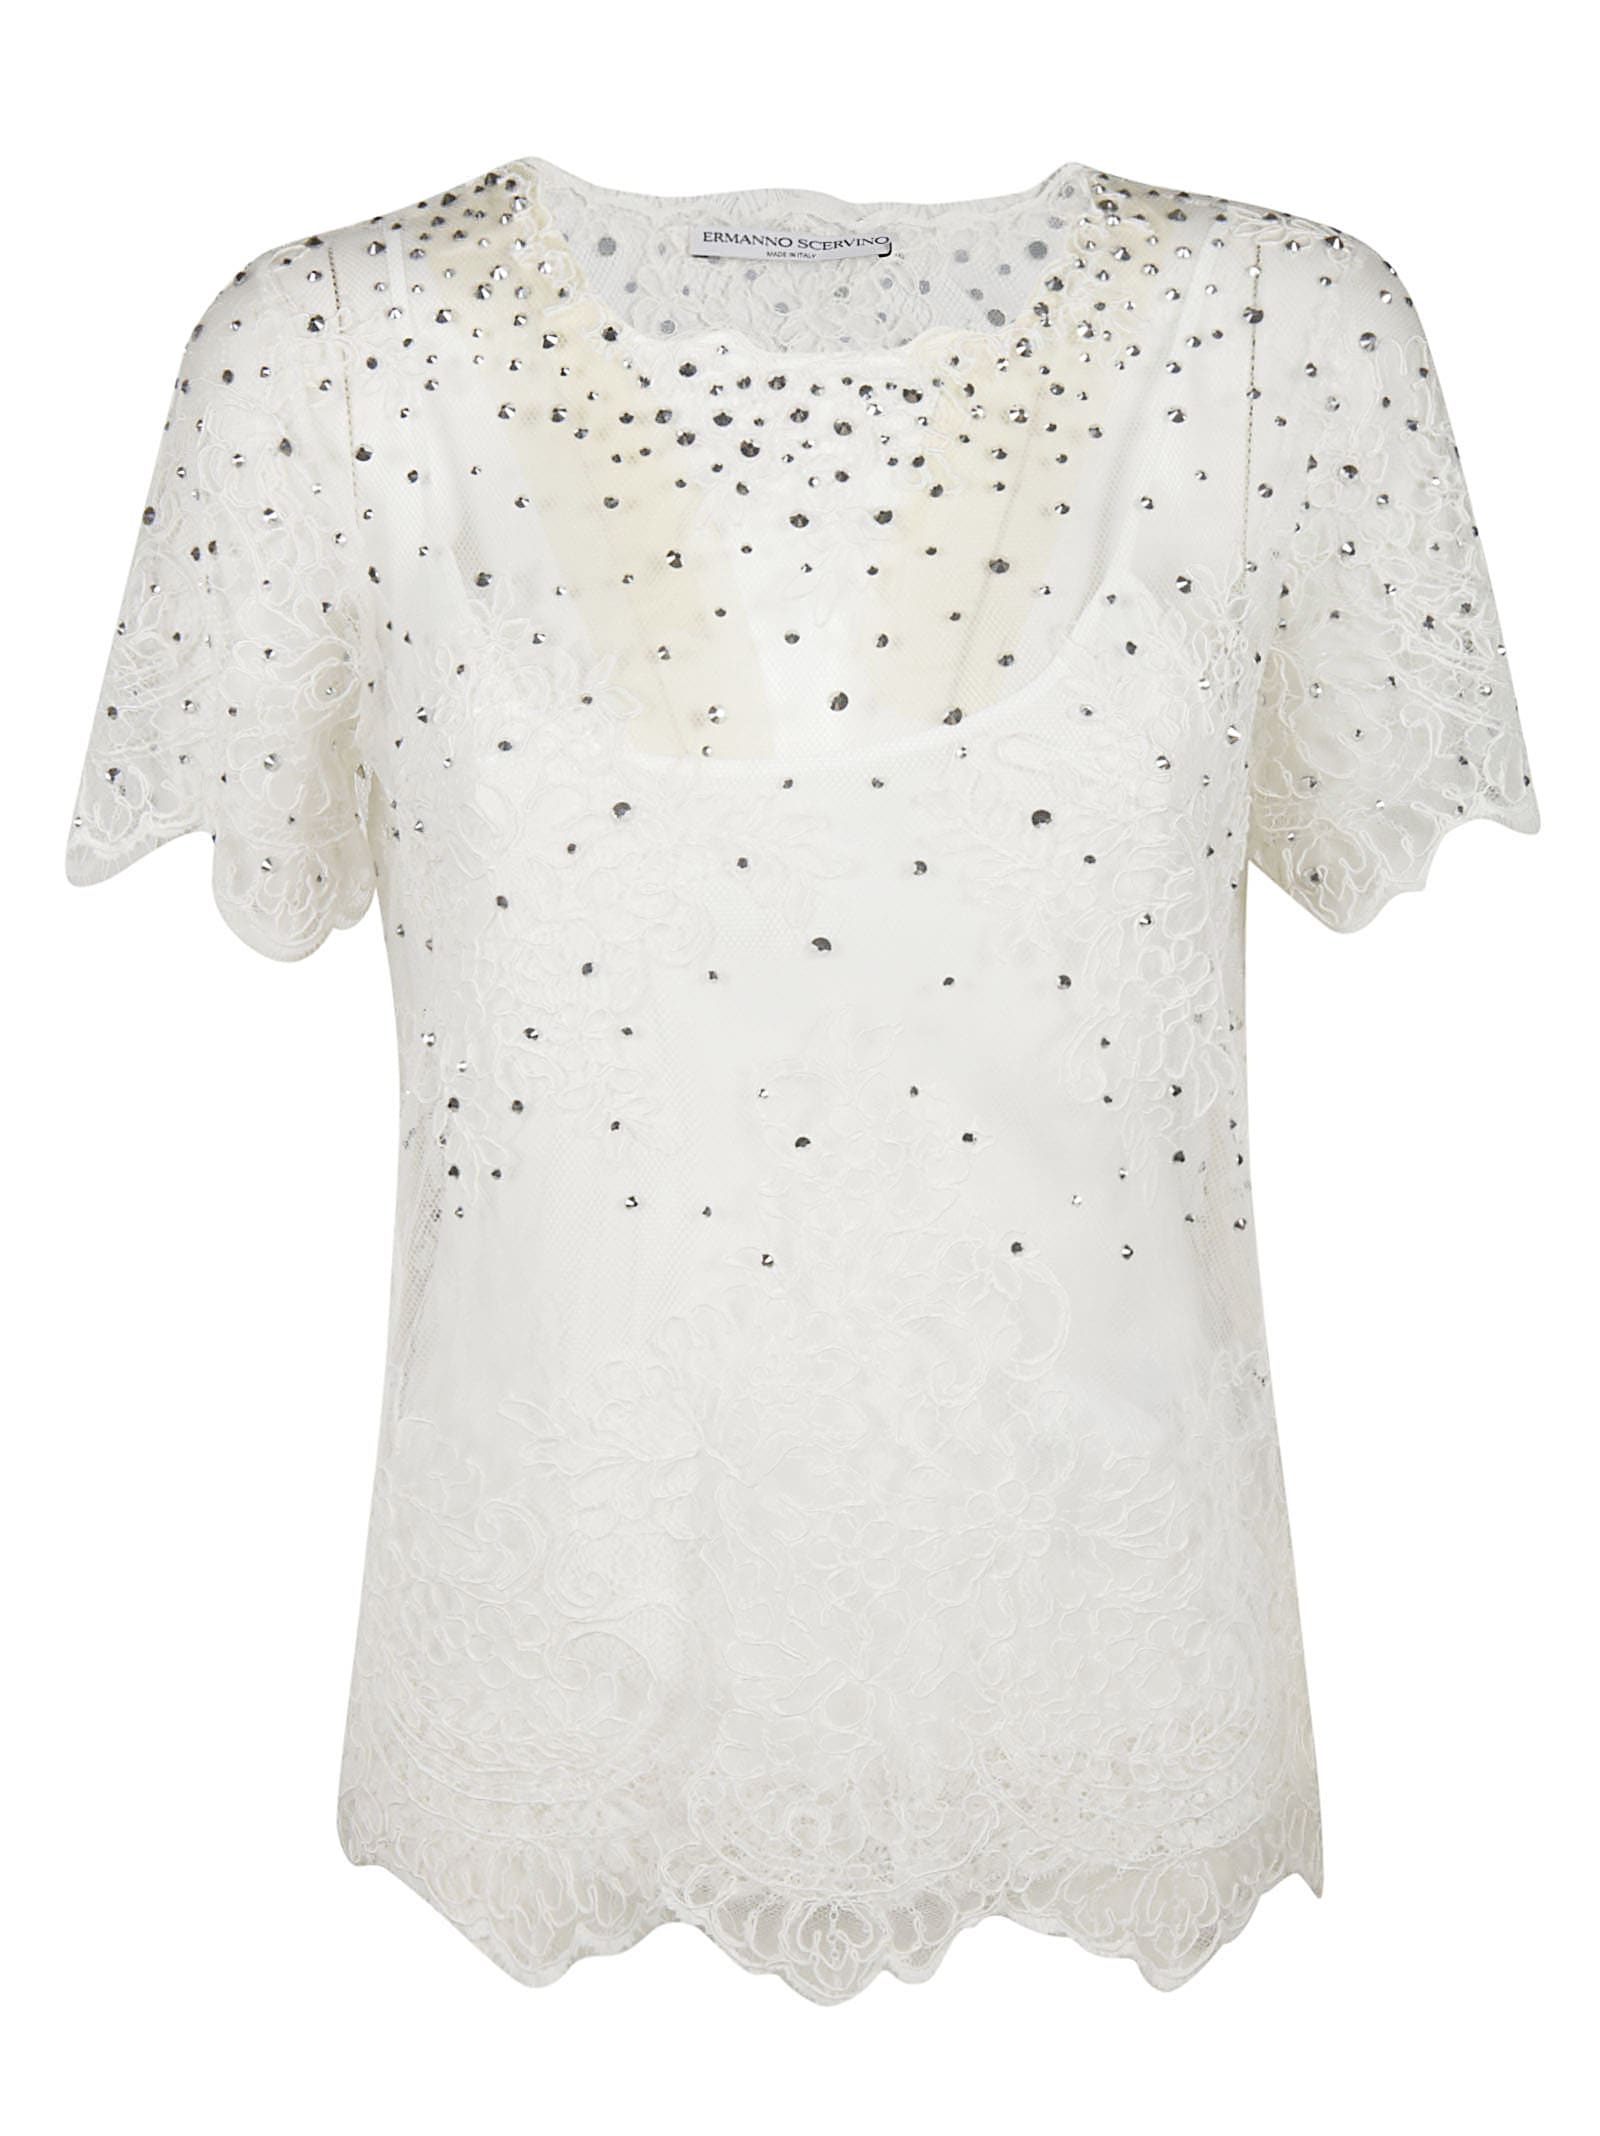 Ermanno Scervino Embellished Top In White | ModeSens